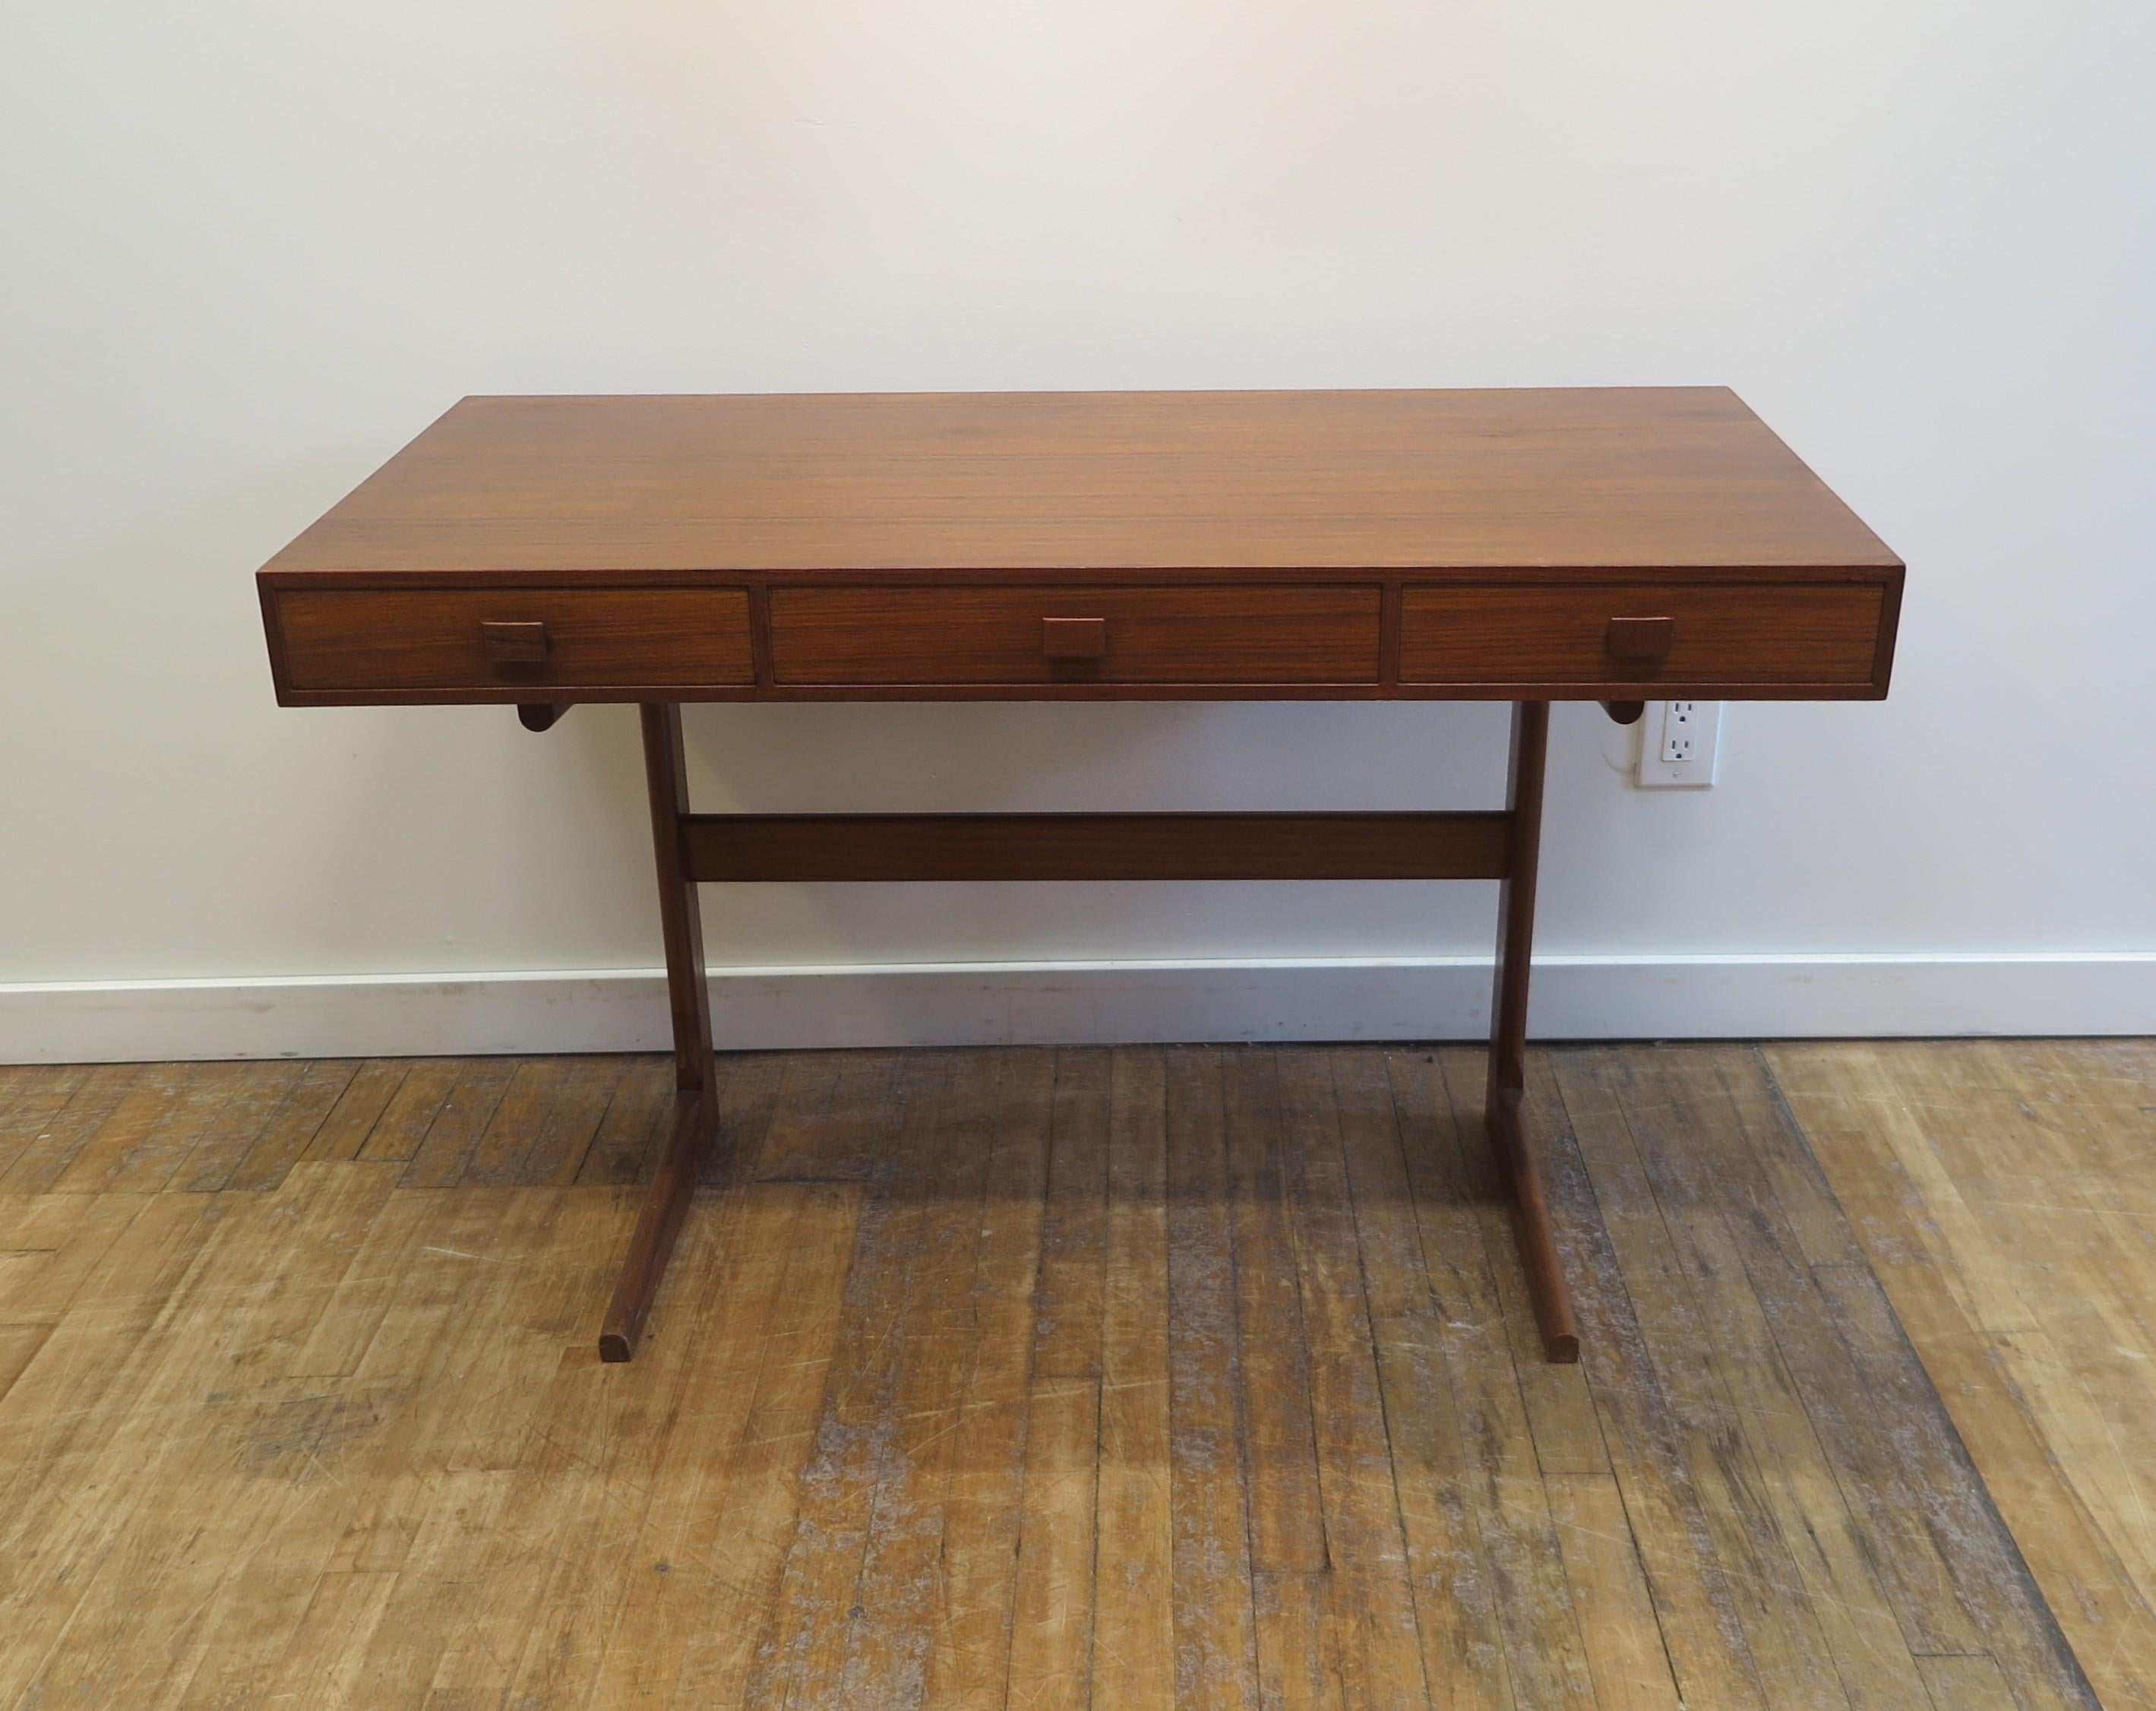 Danish Modern Cantilever Desk by Georg Petersens Molbelfabrik .  Georg Petersens Cantilever desk in teak.  The desk sits on two cantilever style legs with a slim case housing three drawers.  Stunning minimalist design completely functional.  This